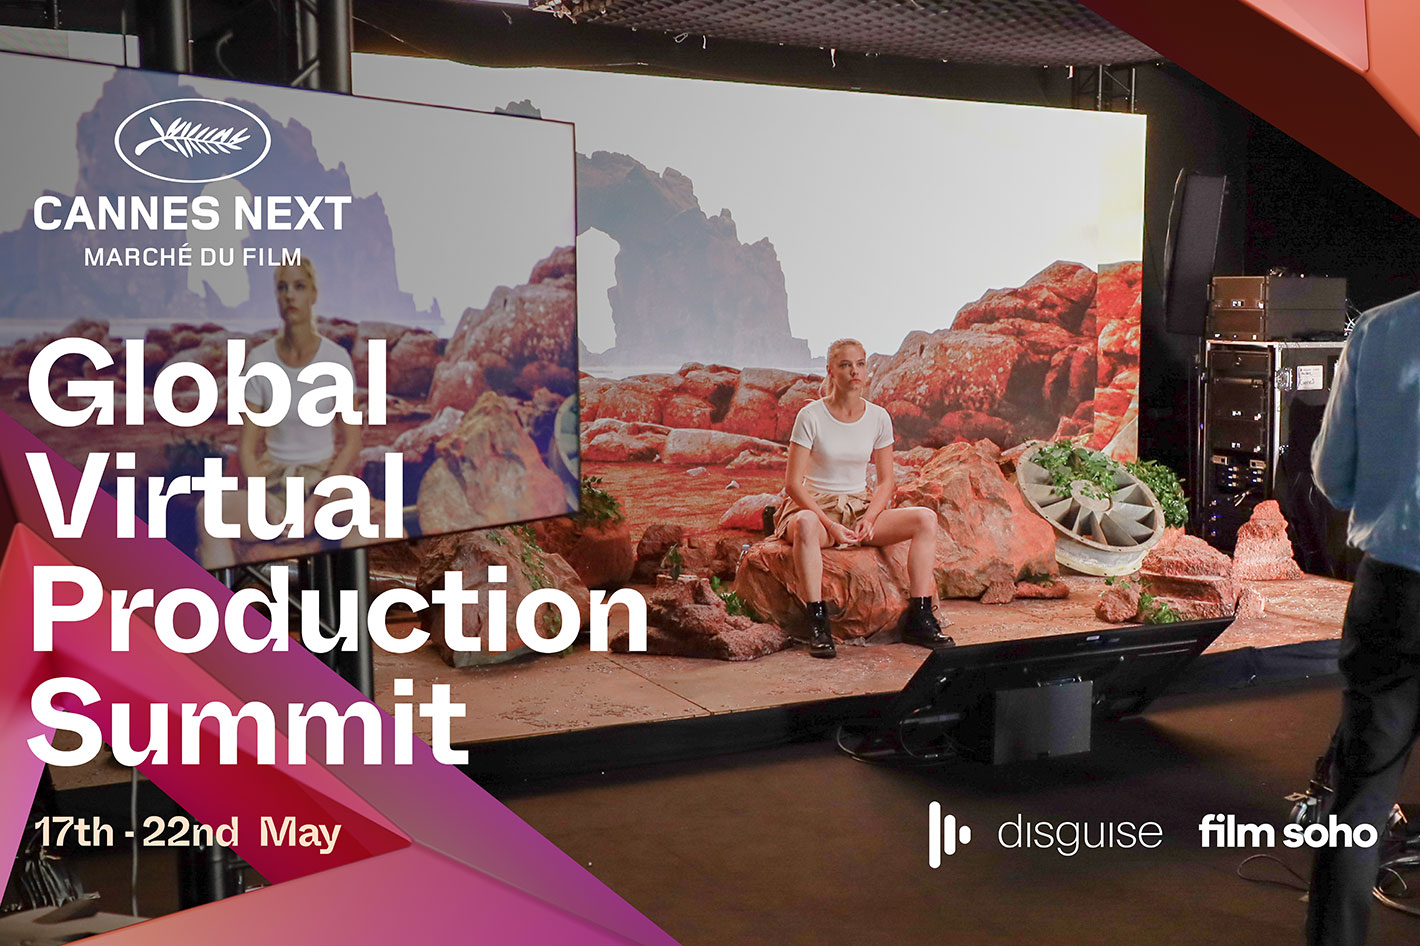 Cannes to have a global Virtual Production Summit